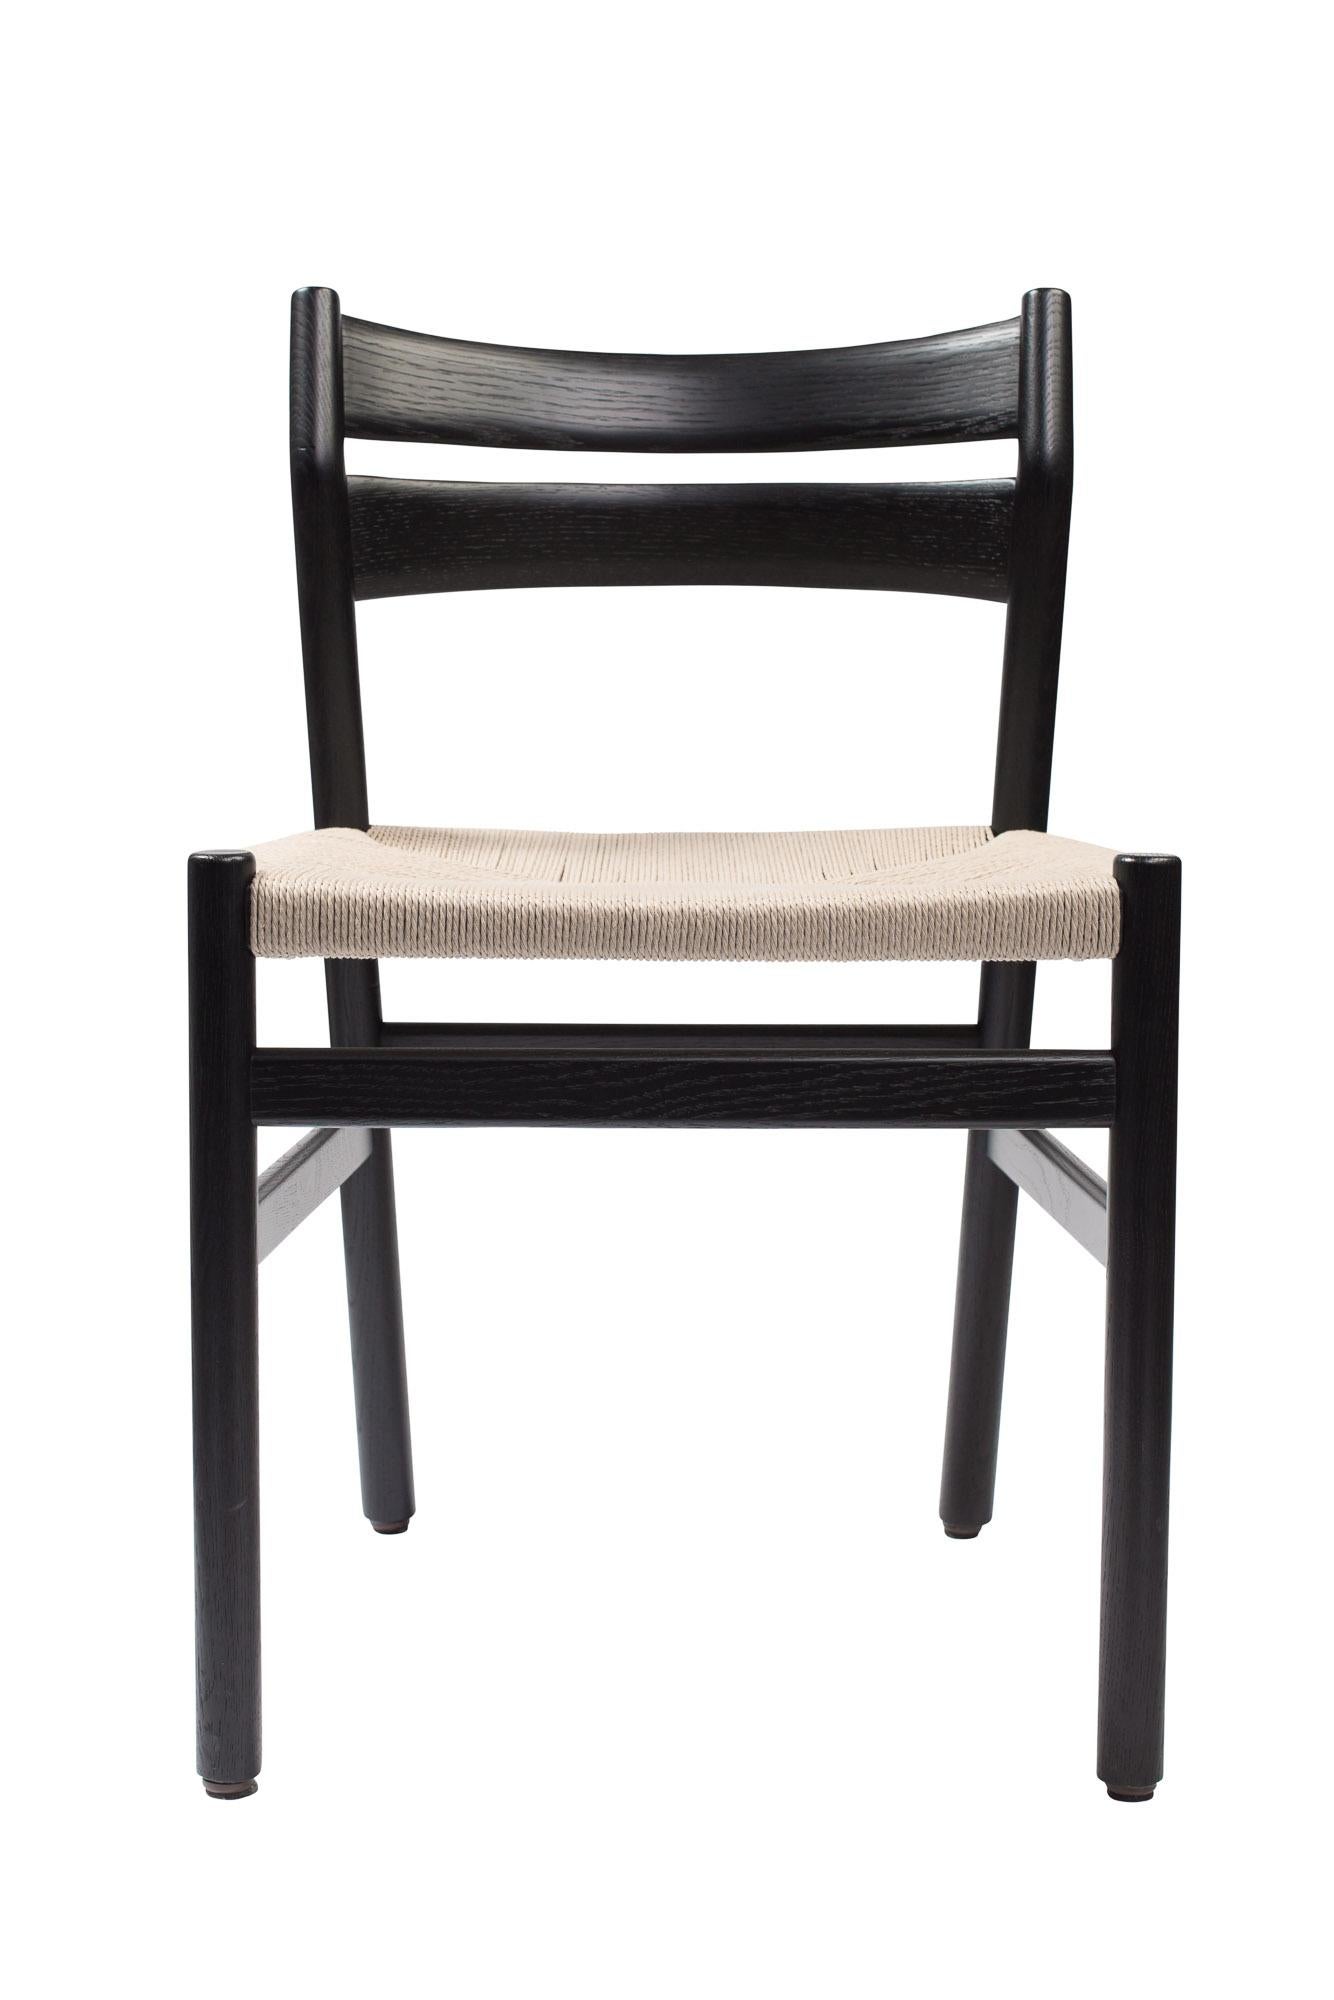 BMI chair
Solid oak frame, paper cordel seat
Dimensions : H78 x 44 x 51 cm (seat height 46cm)

Wood:
– Oak
– Smoked oak
– Black lacquered oak

Paper cordel:
– Natural
– Black

 
The collection of chairs BM1 and BM2, signed by DK3, was